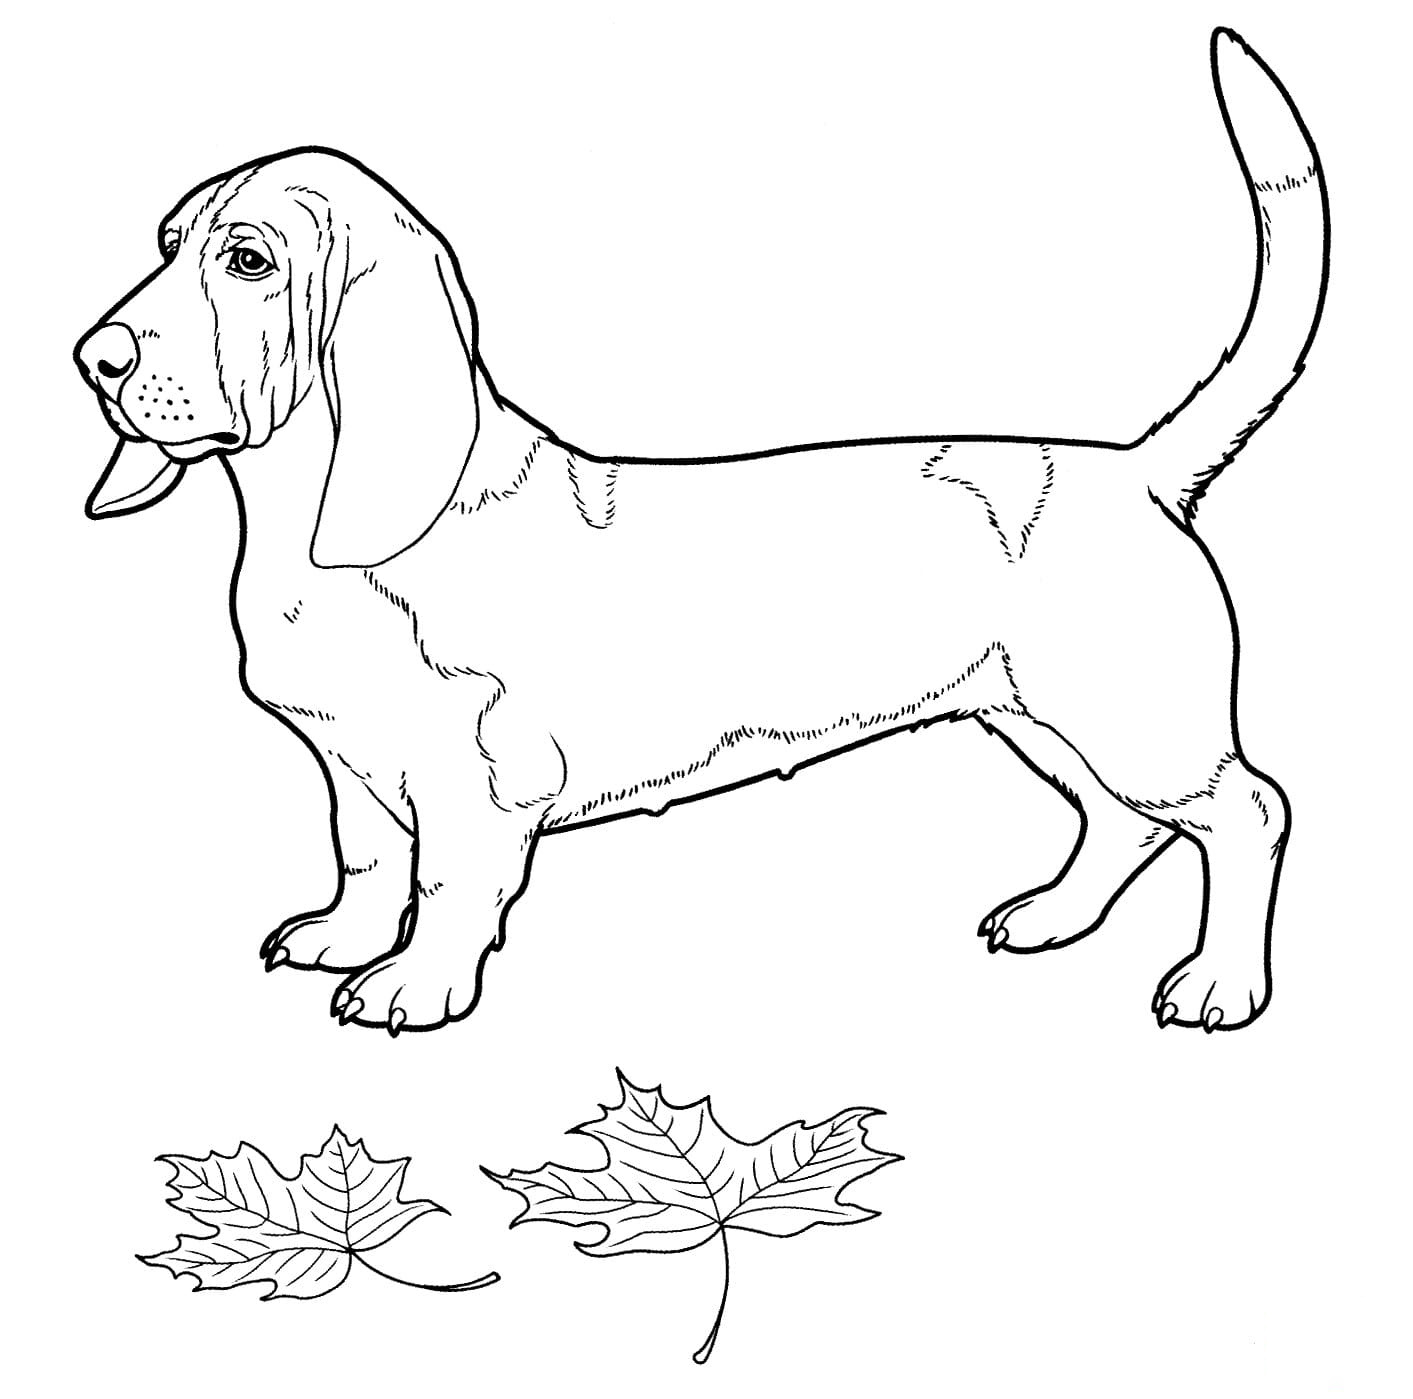 Basset Hound from Dogs